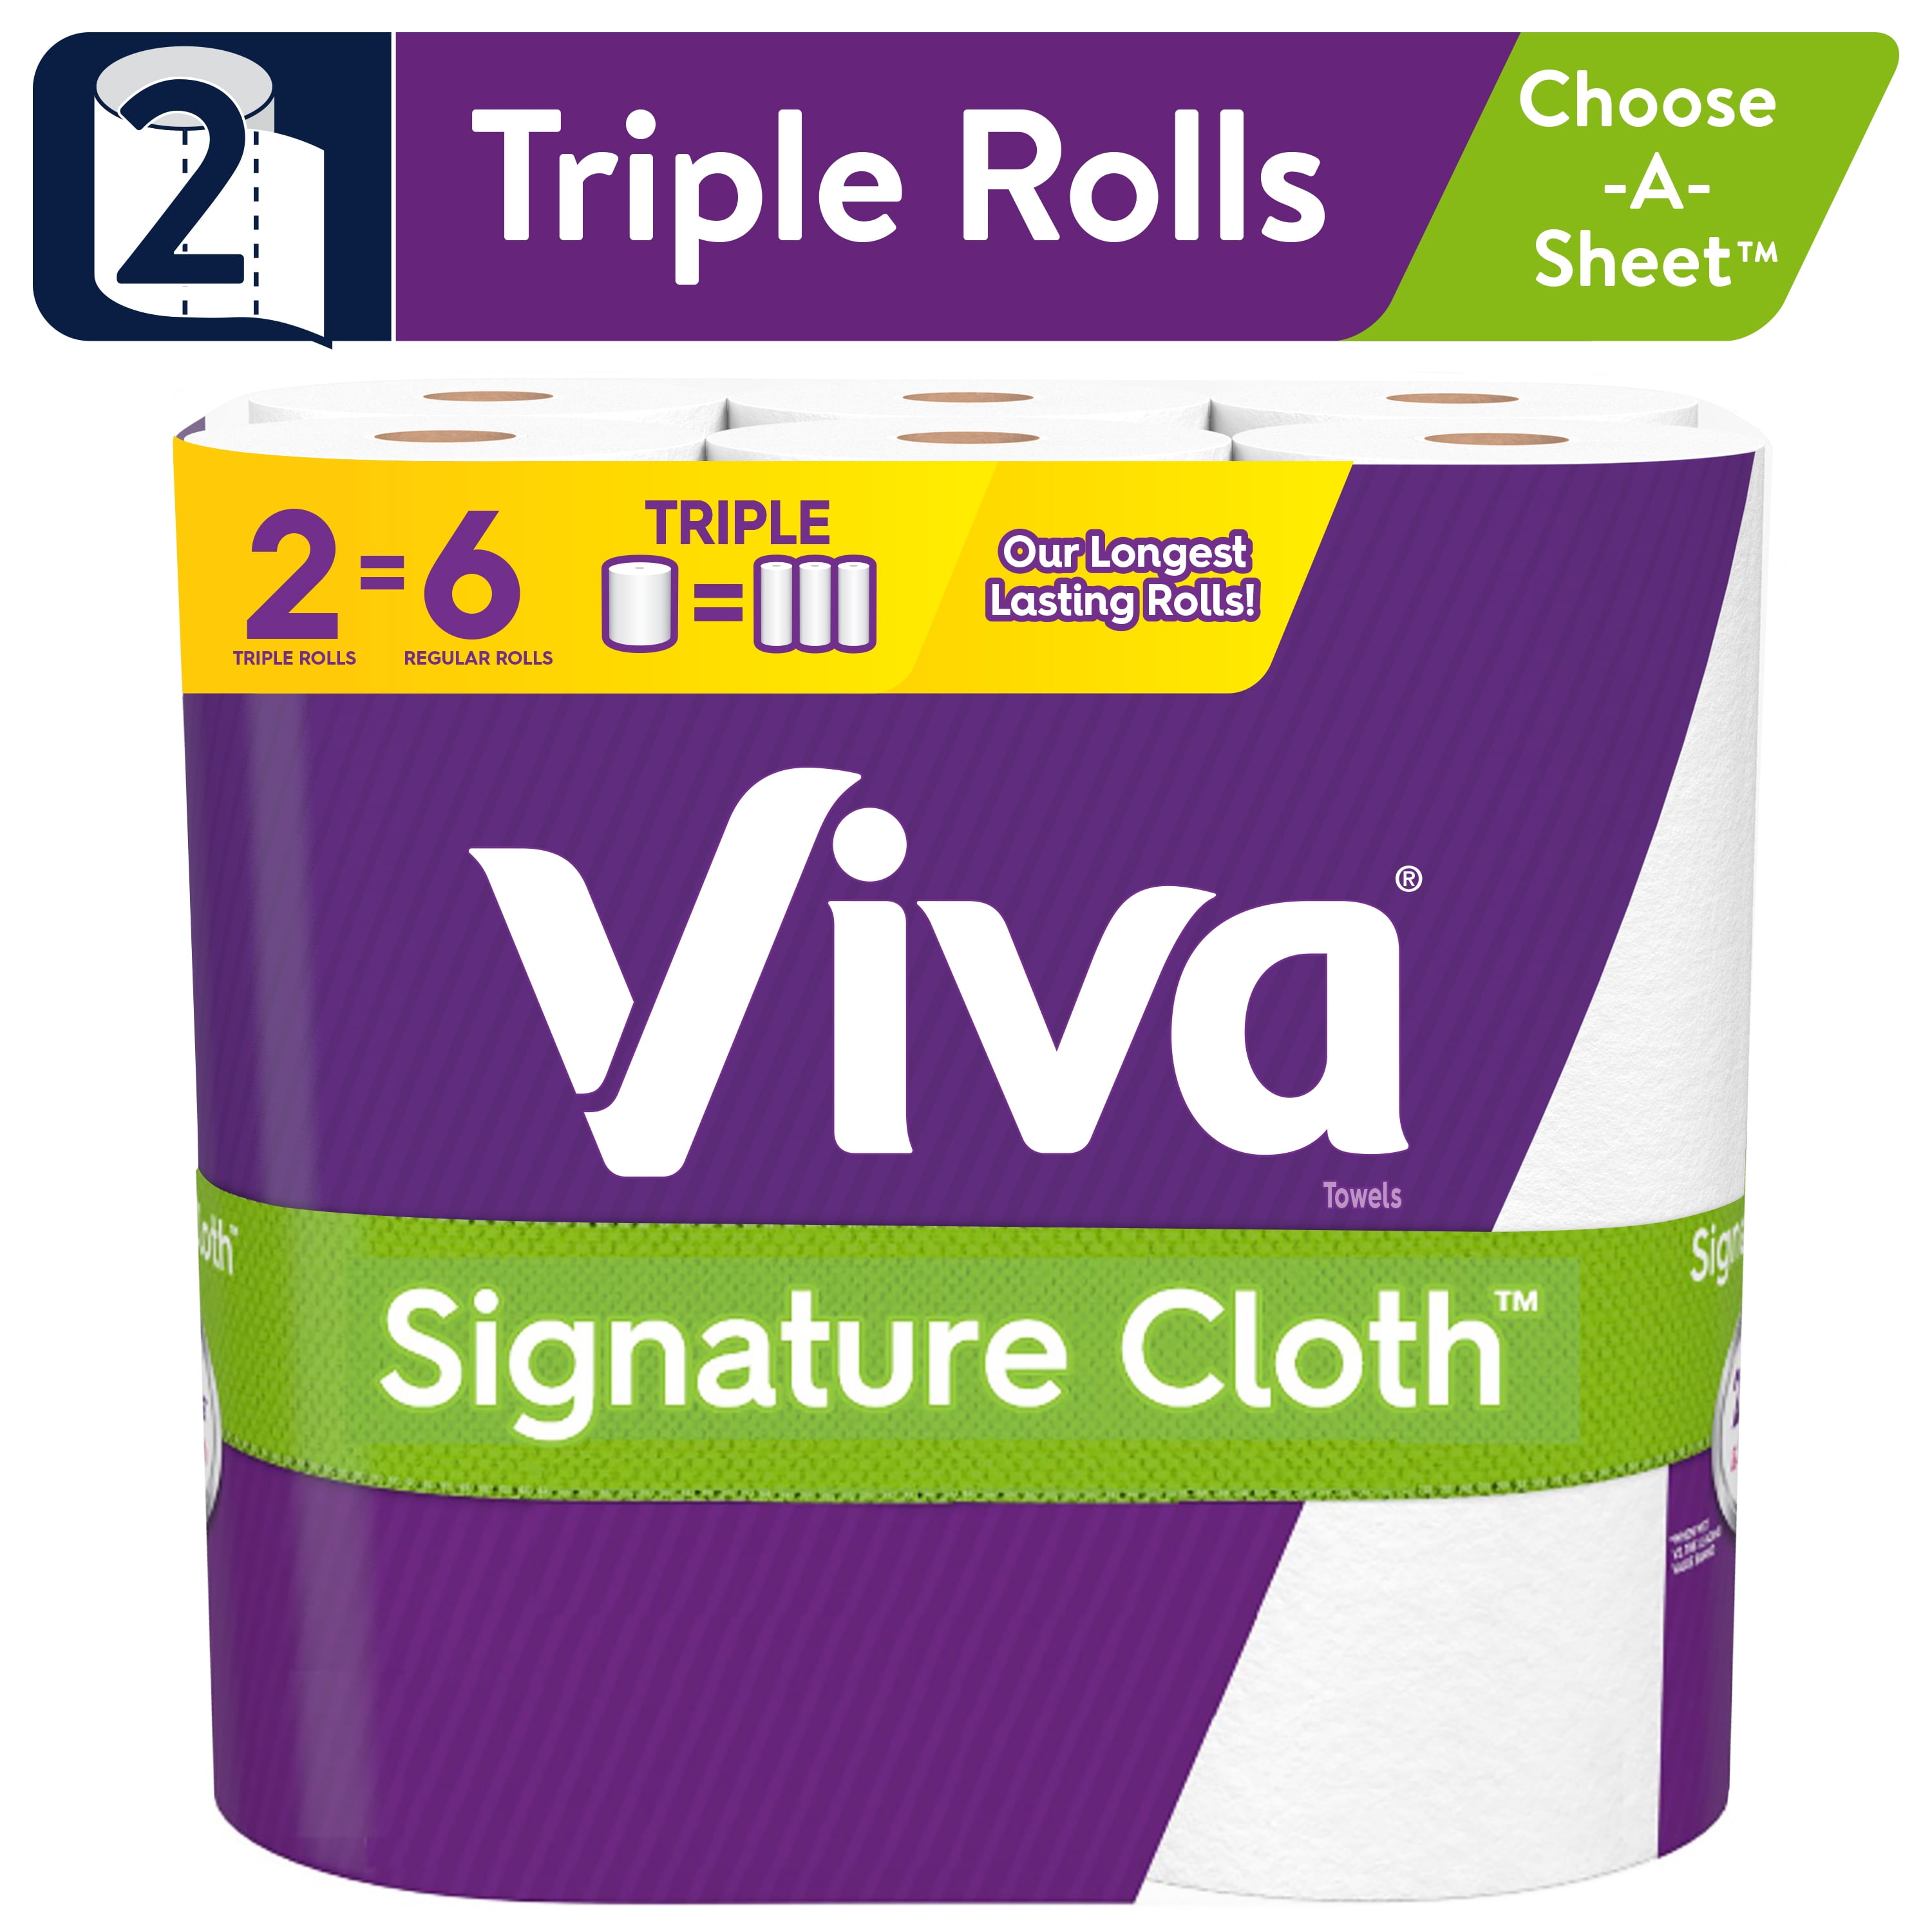 White VIVA Choose-A-Sheet* Paper Towels 6 Rolls Double Roll 